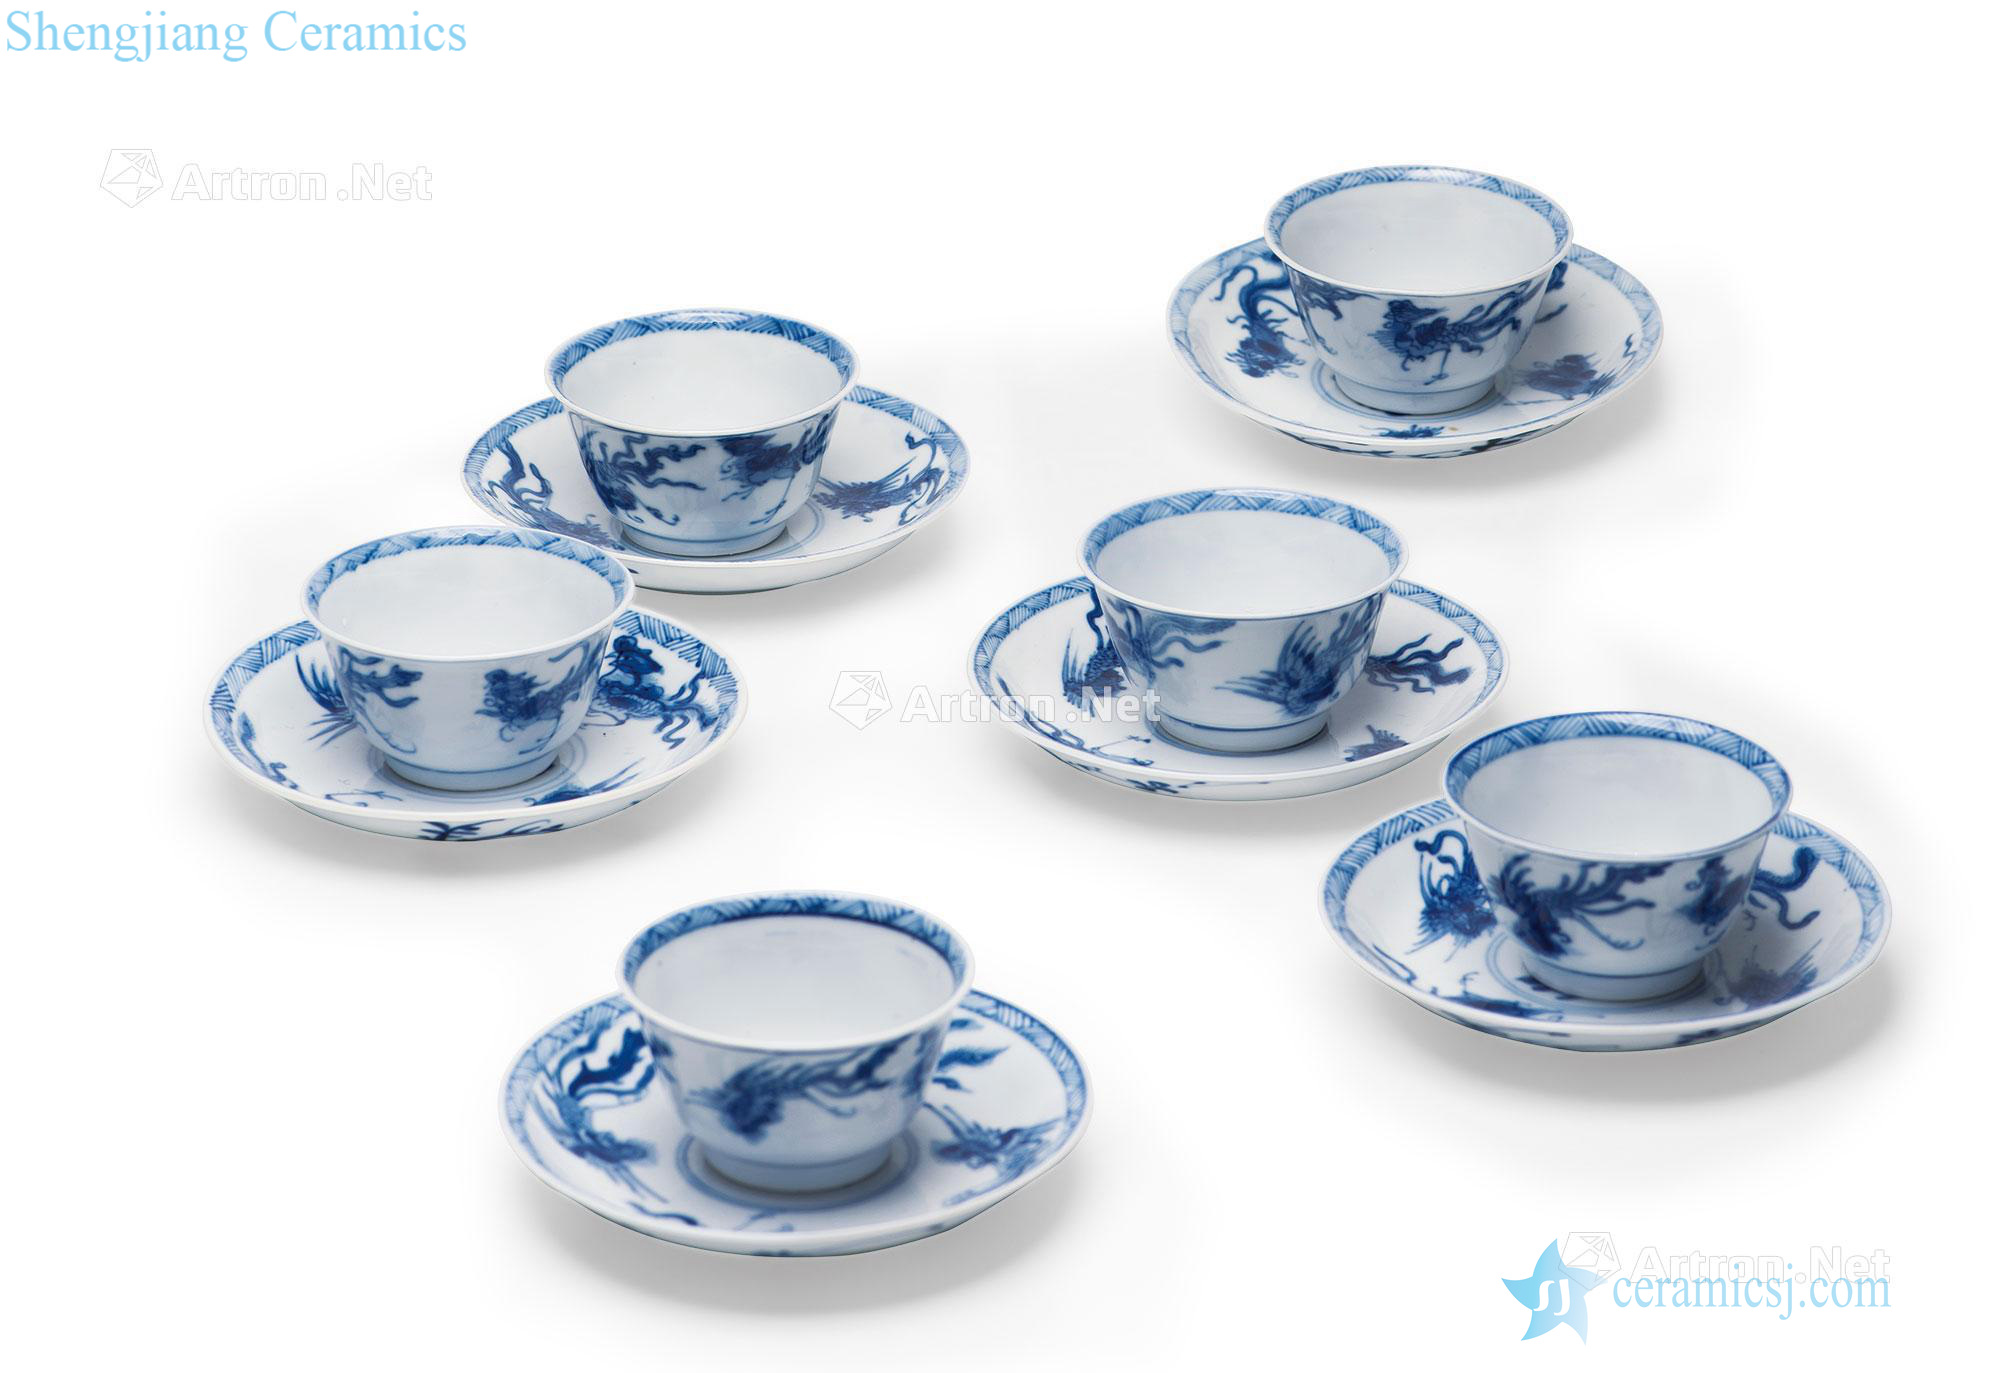 The qing emperor kangxi Blue and white four chicken cups and saucers (a group of twelve pieces)